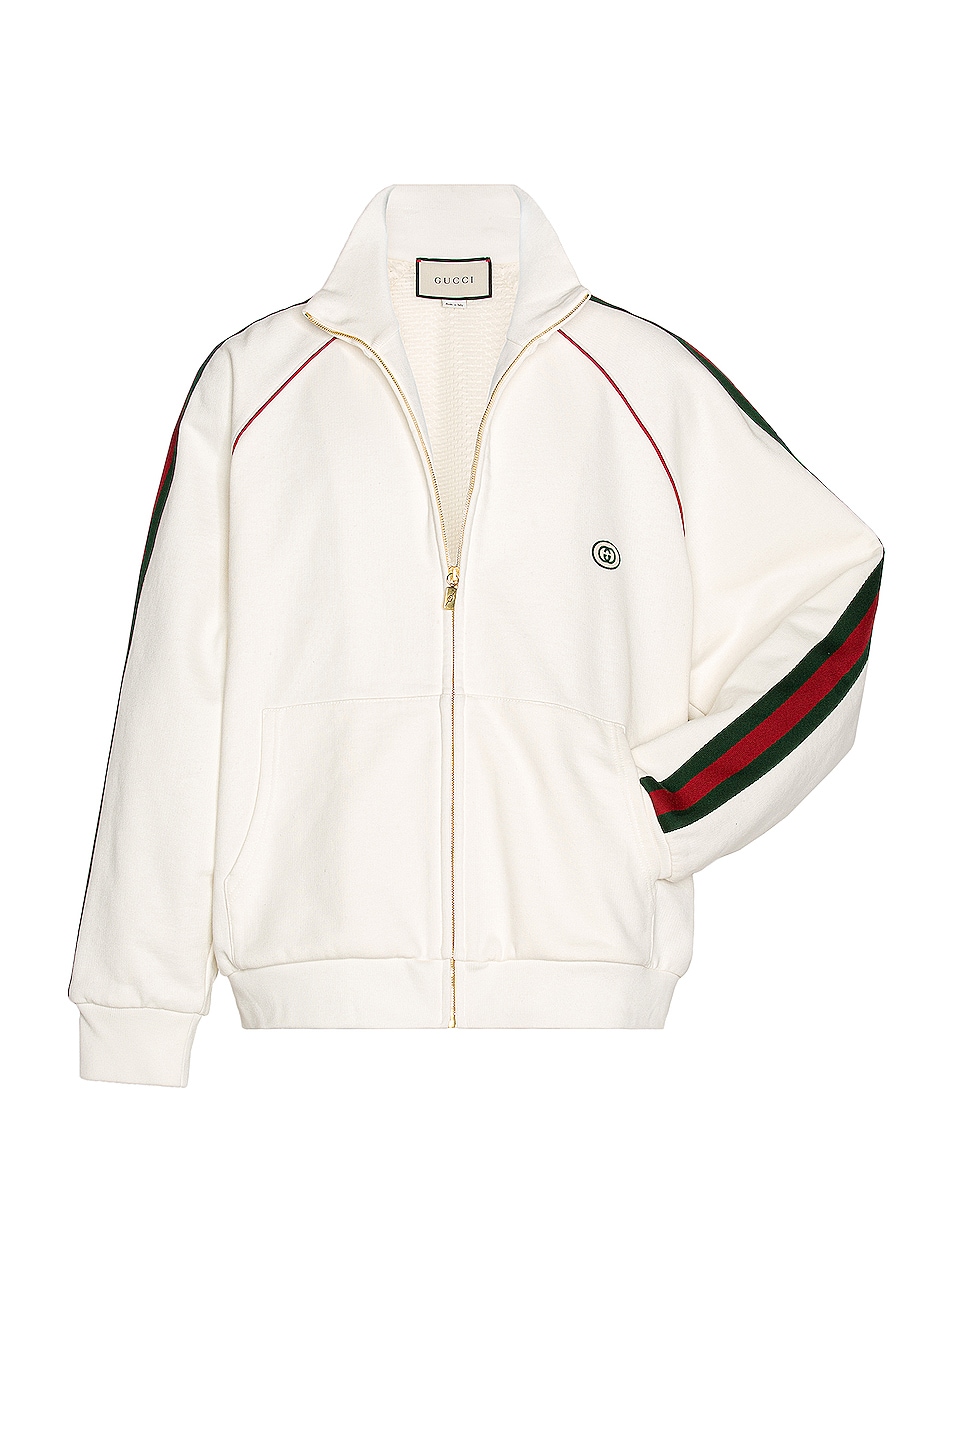 Gucci Track Jacket in Ivory & Green & Red | FWRD